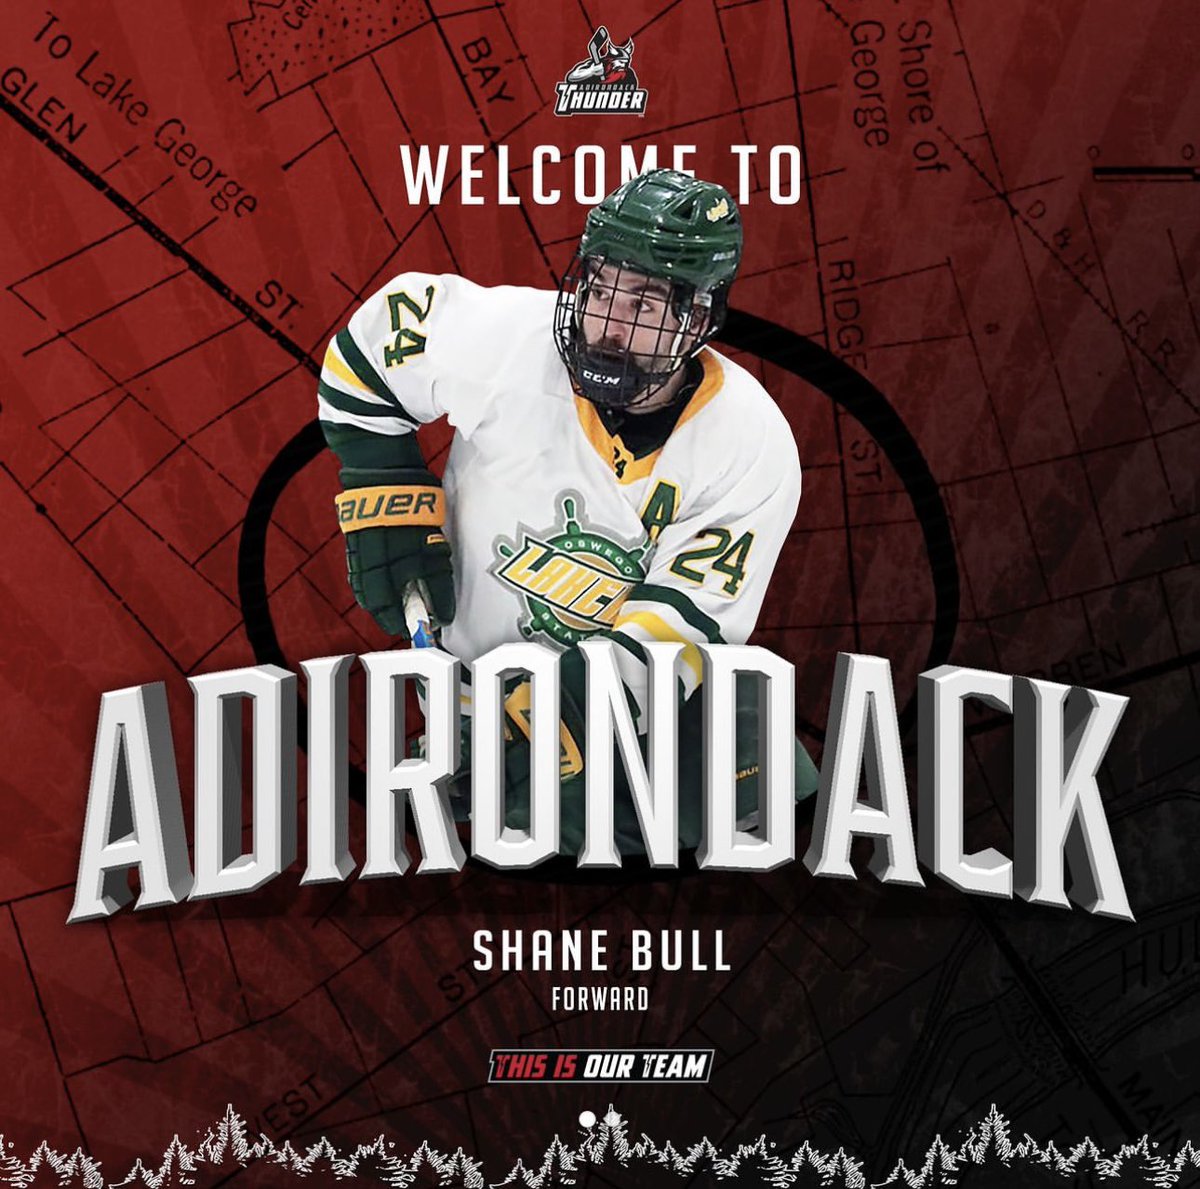 Congratulations to Senior forward Shane Bull on signing with the Adirondack Thunder of the ECHL. Shane completes his Laker career with 84 pts in 72 games.